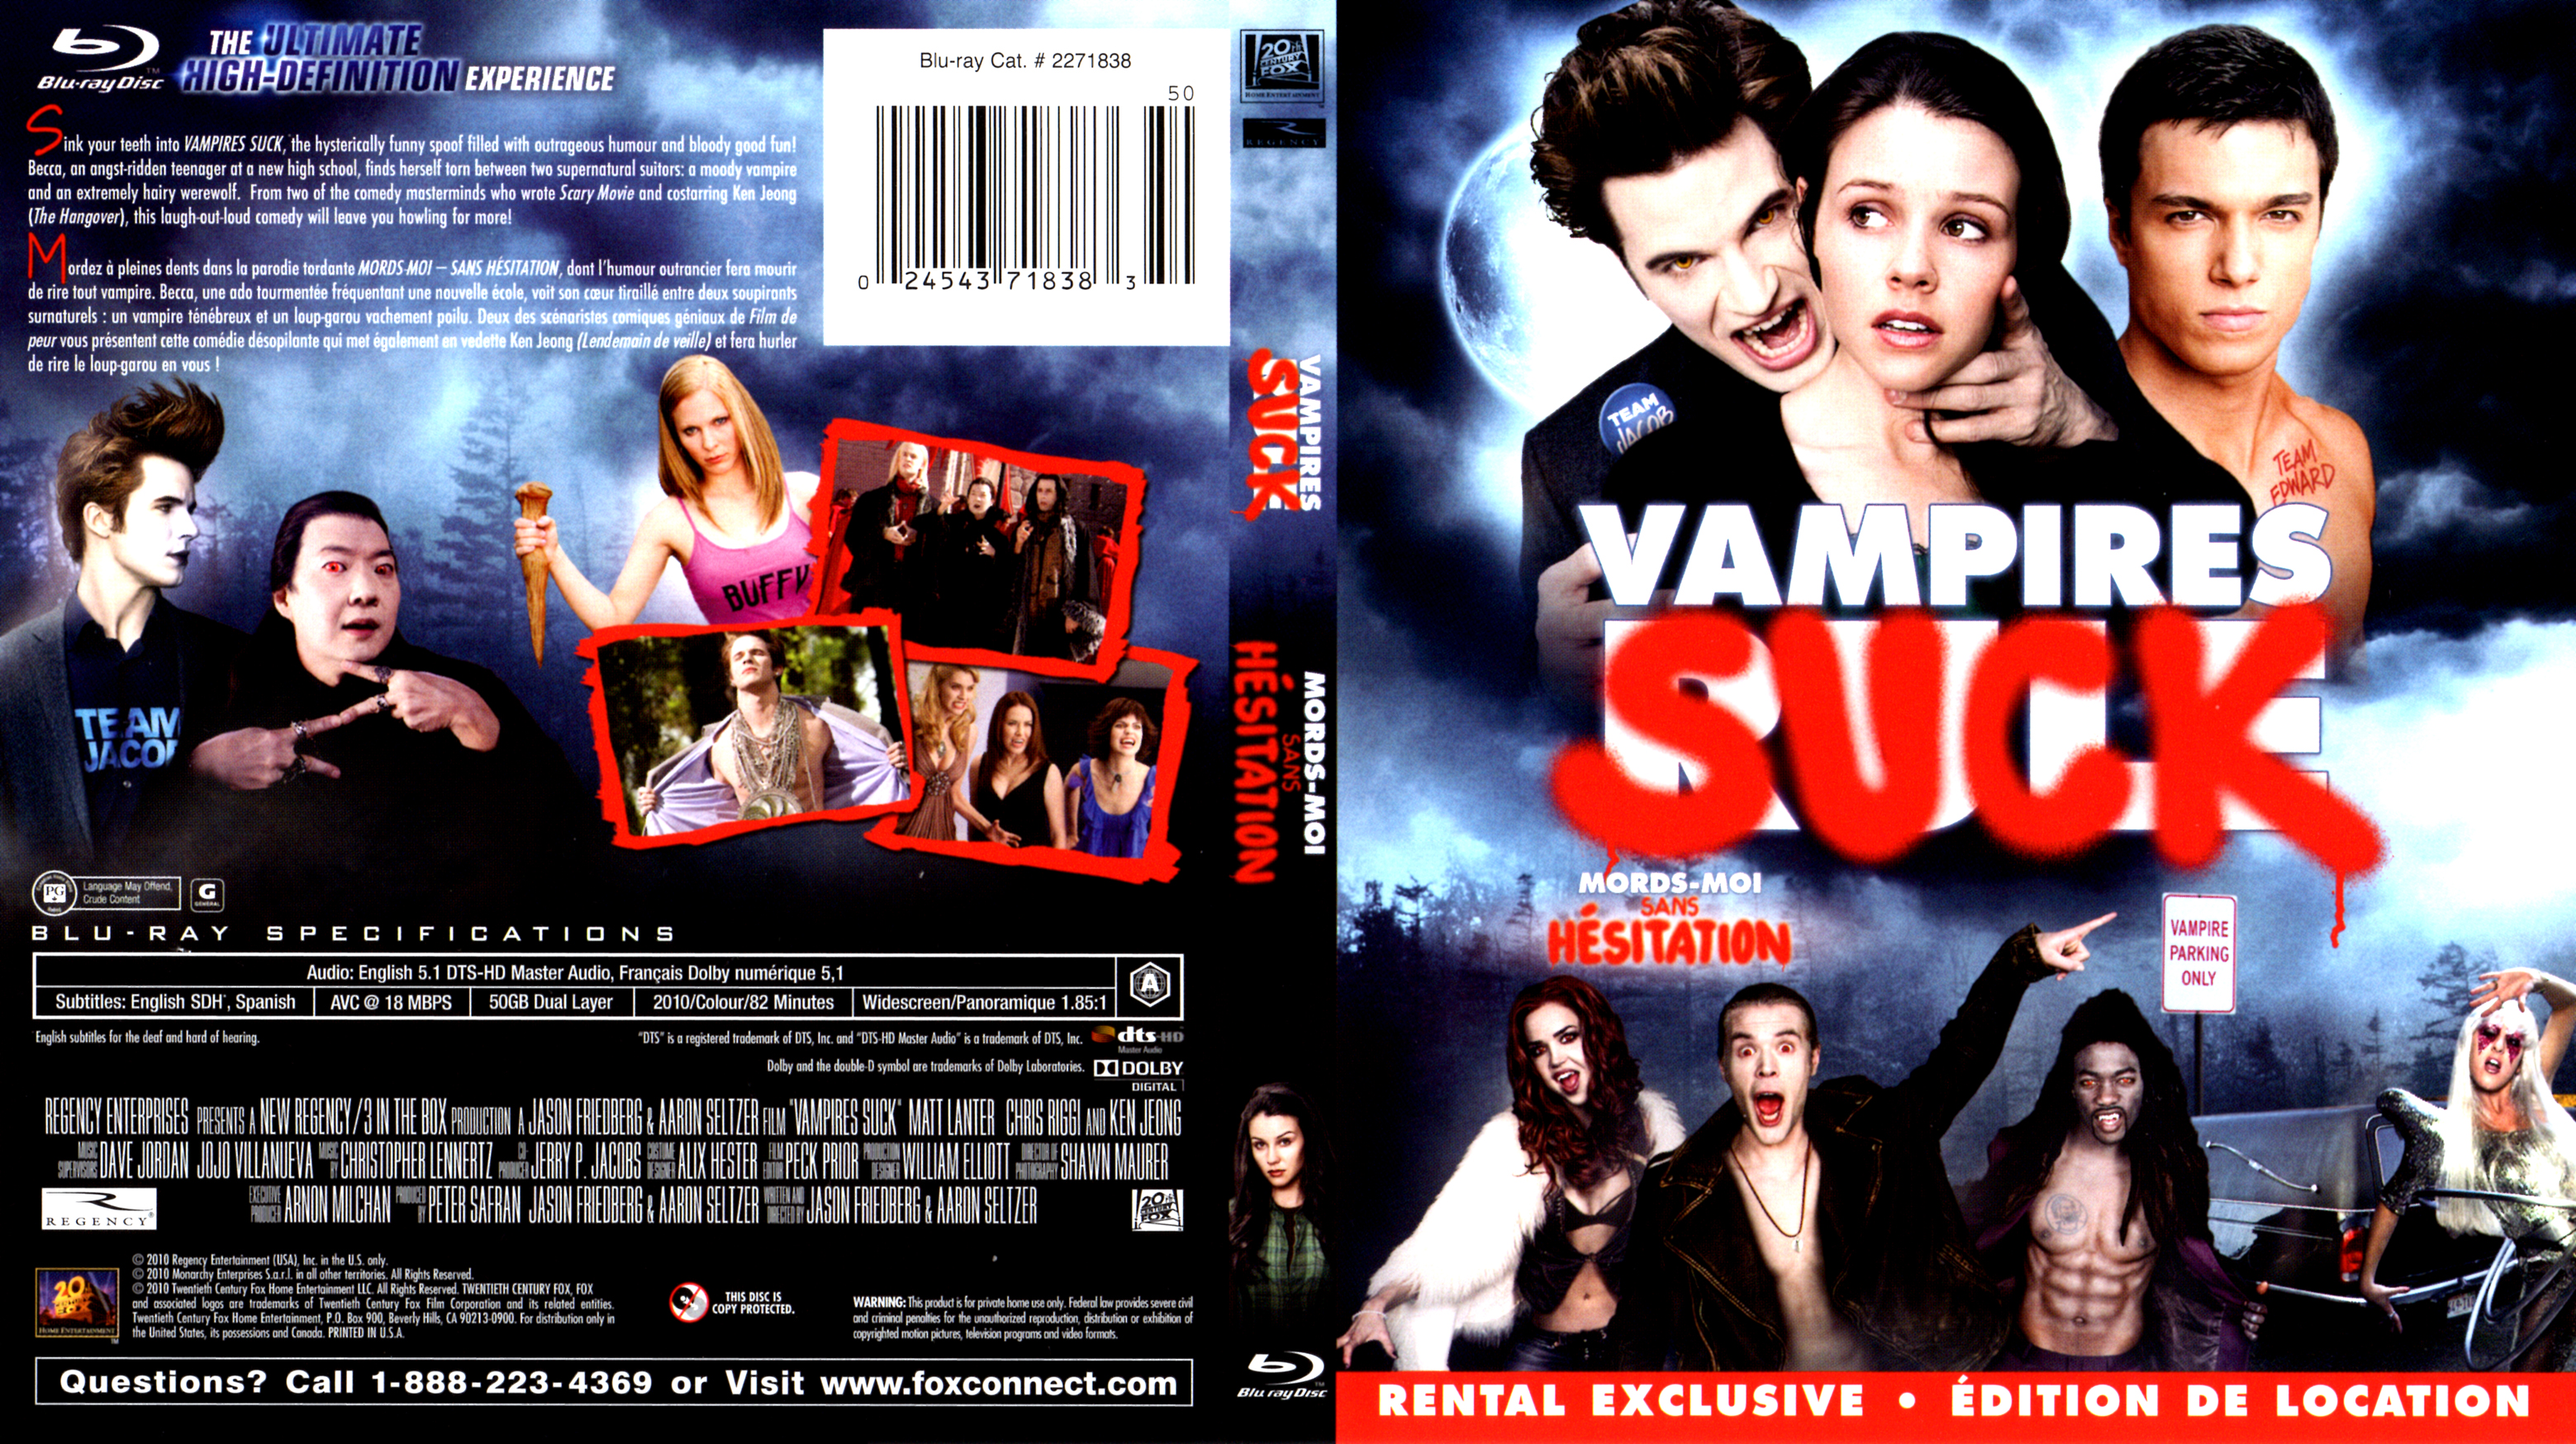 Jaquette DVD Mord moi sans hesitation - Vampires suck (Canadienne) (BLU-RAY)